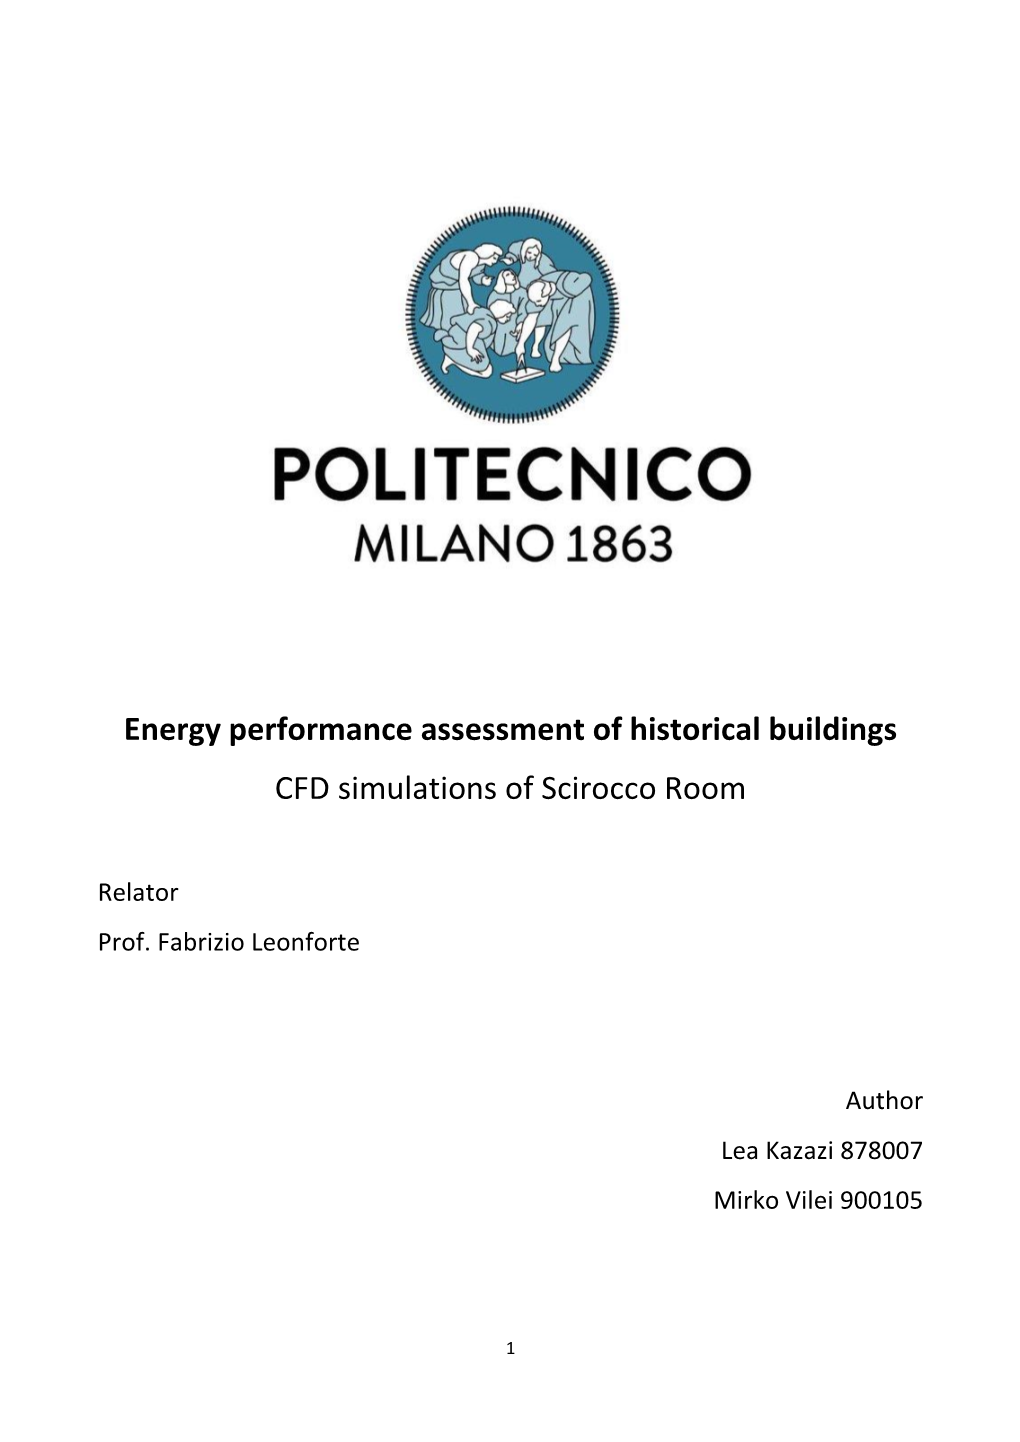 Energy Performance Assessment of Historical Buildings CFD Simulations of Scirocco Room